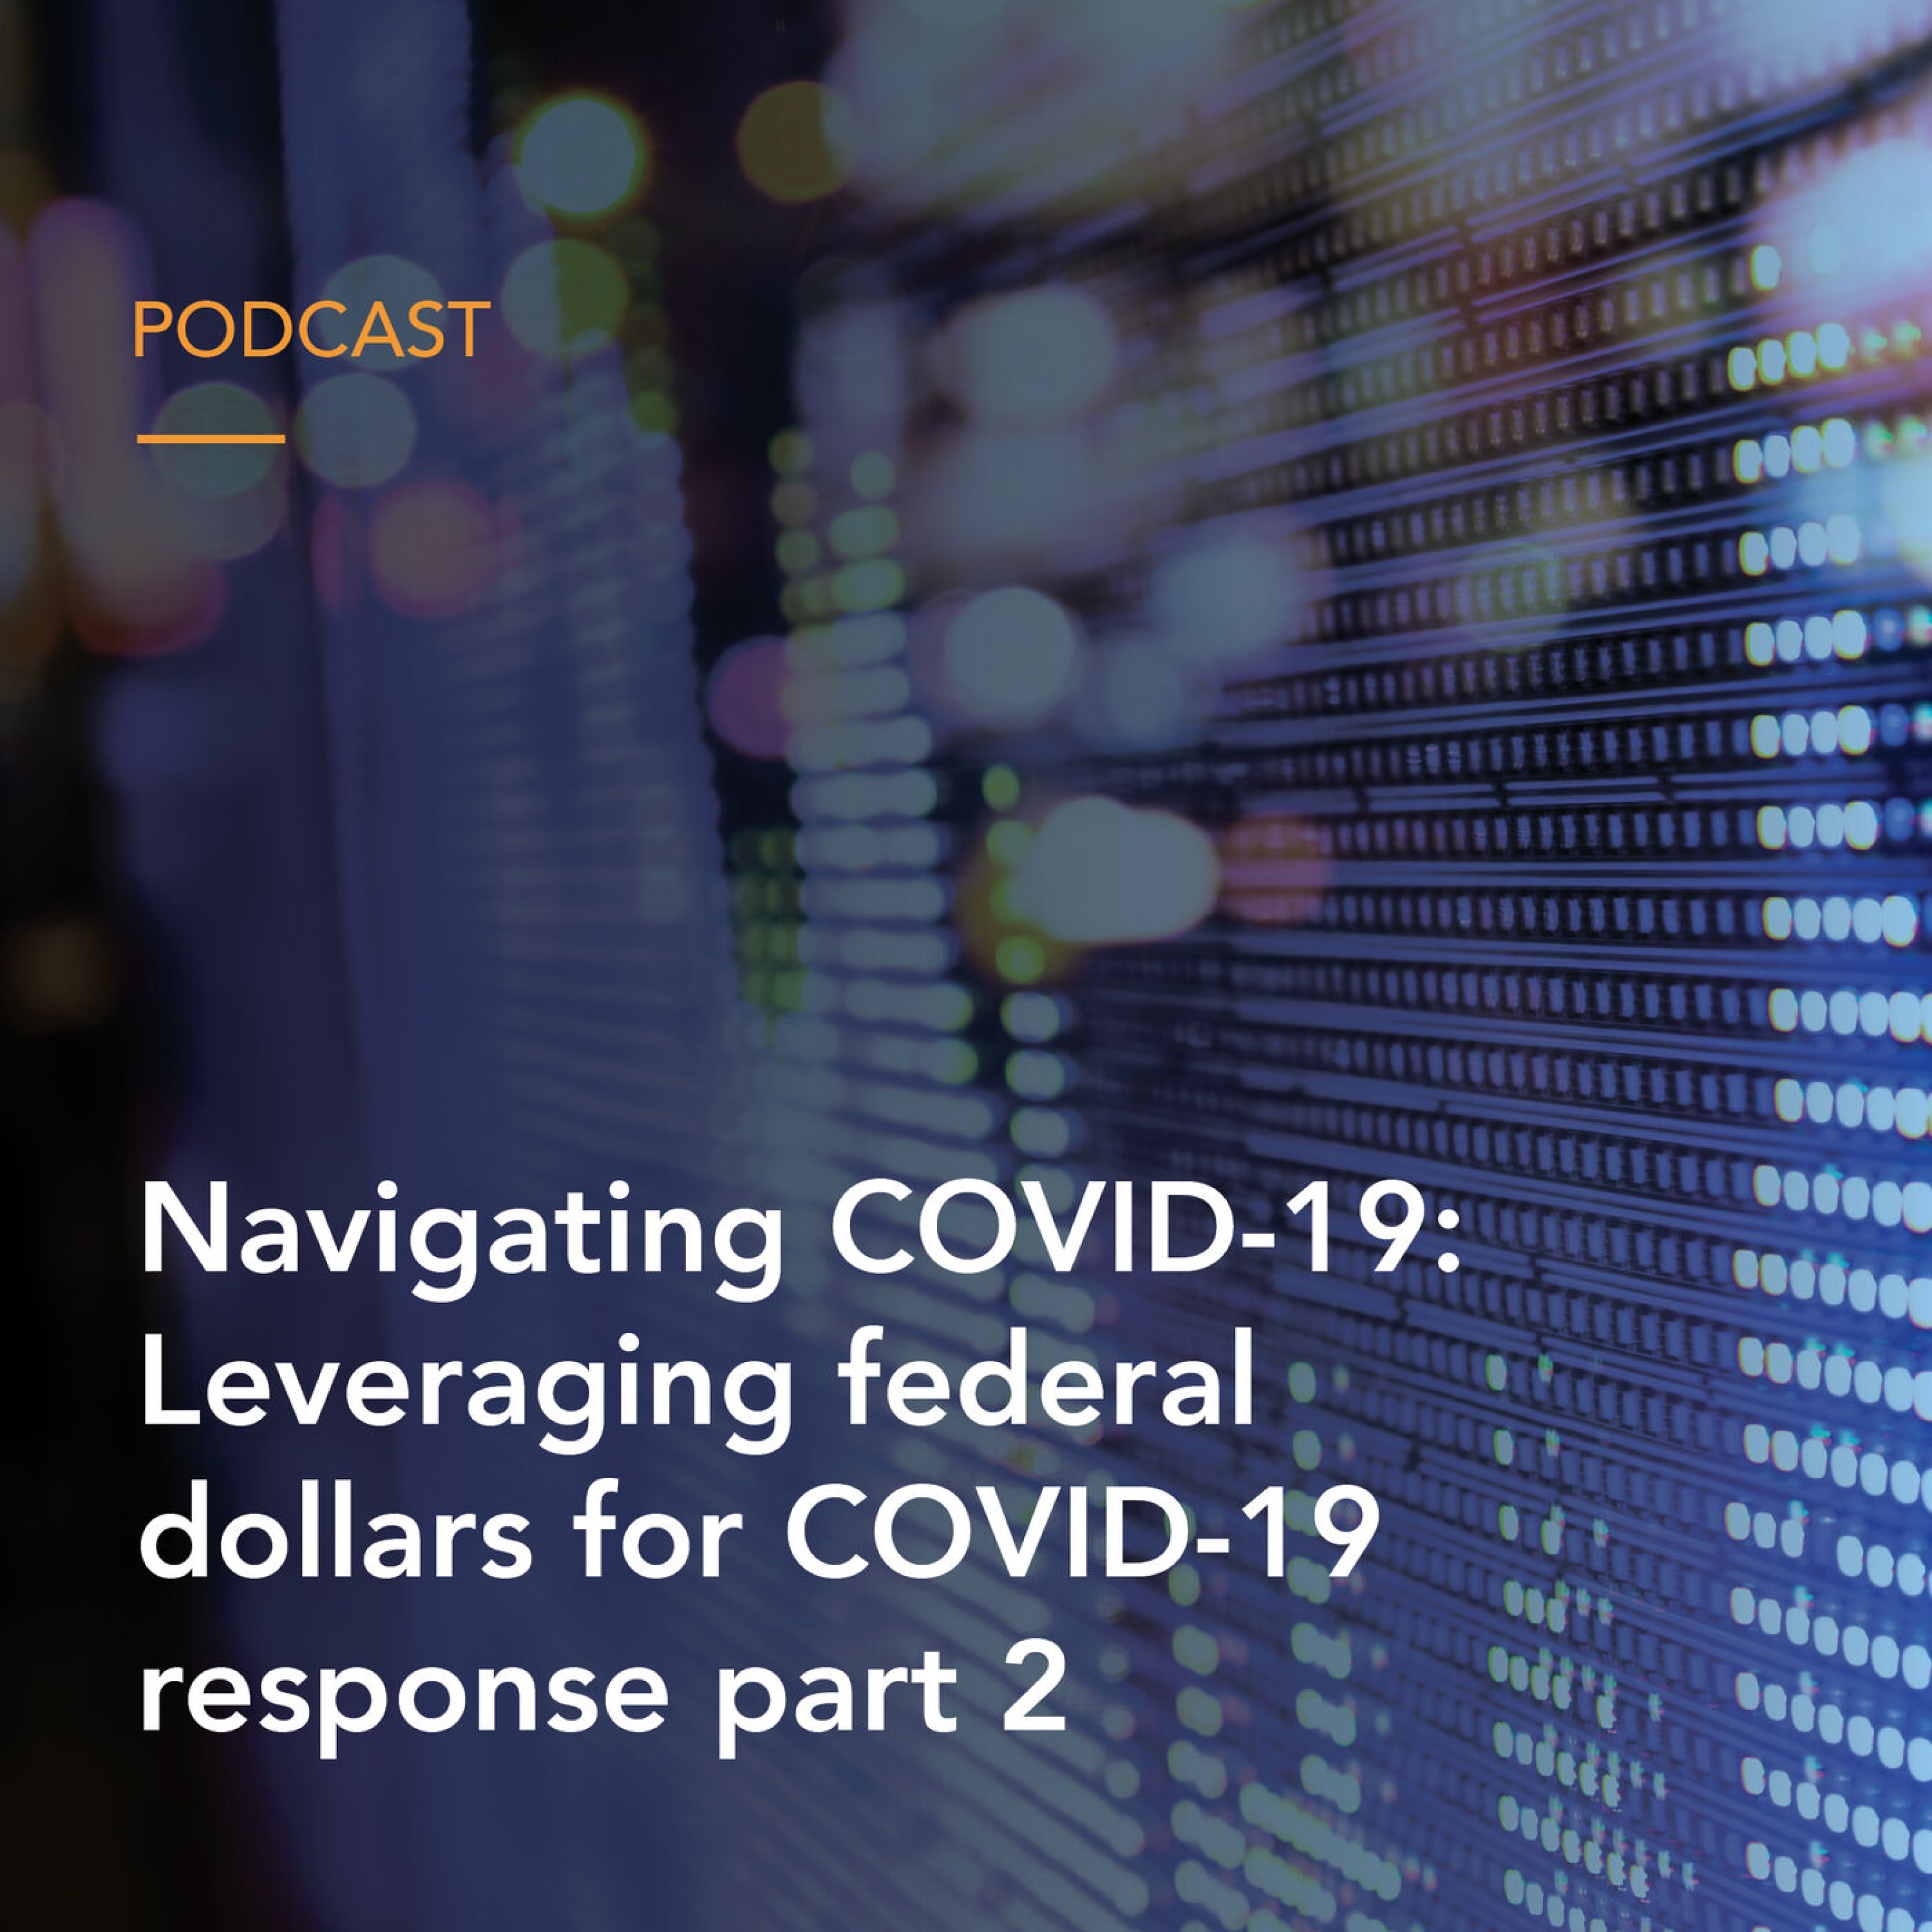 Navigating COVID-19 #8: Leveraging federal dollars for COVID-19 response (Part 2)